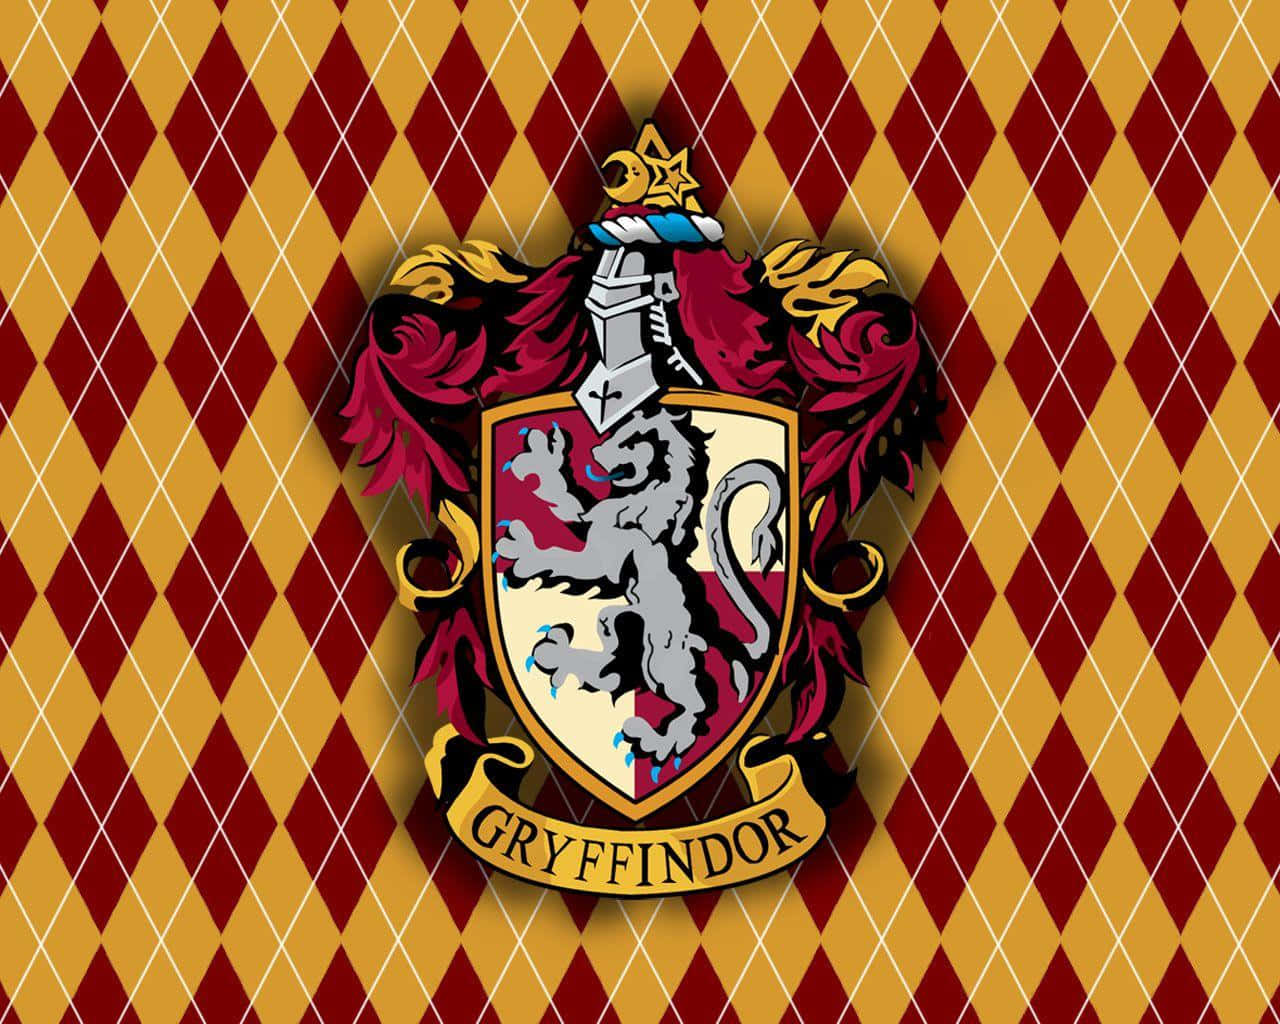 Join Gryffindor and embark on an incredible journey!